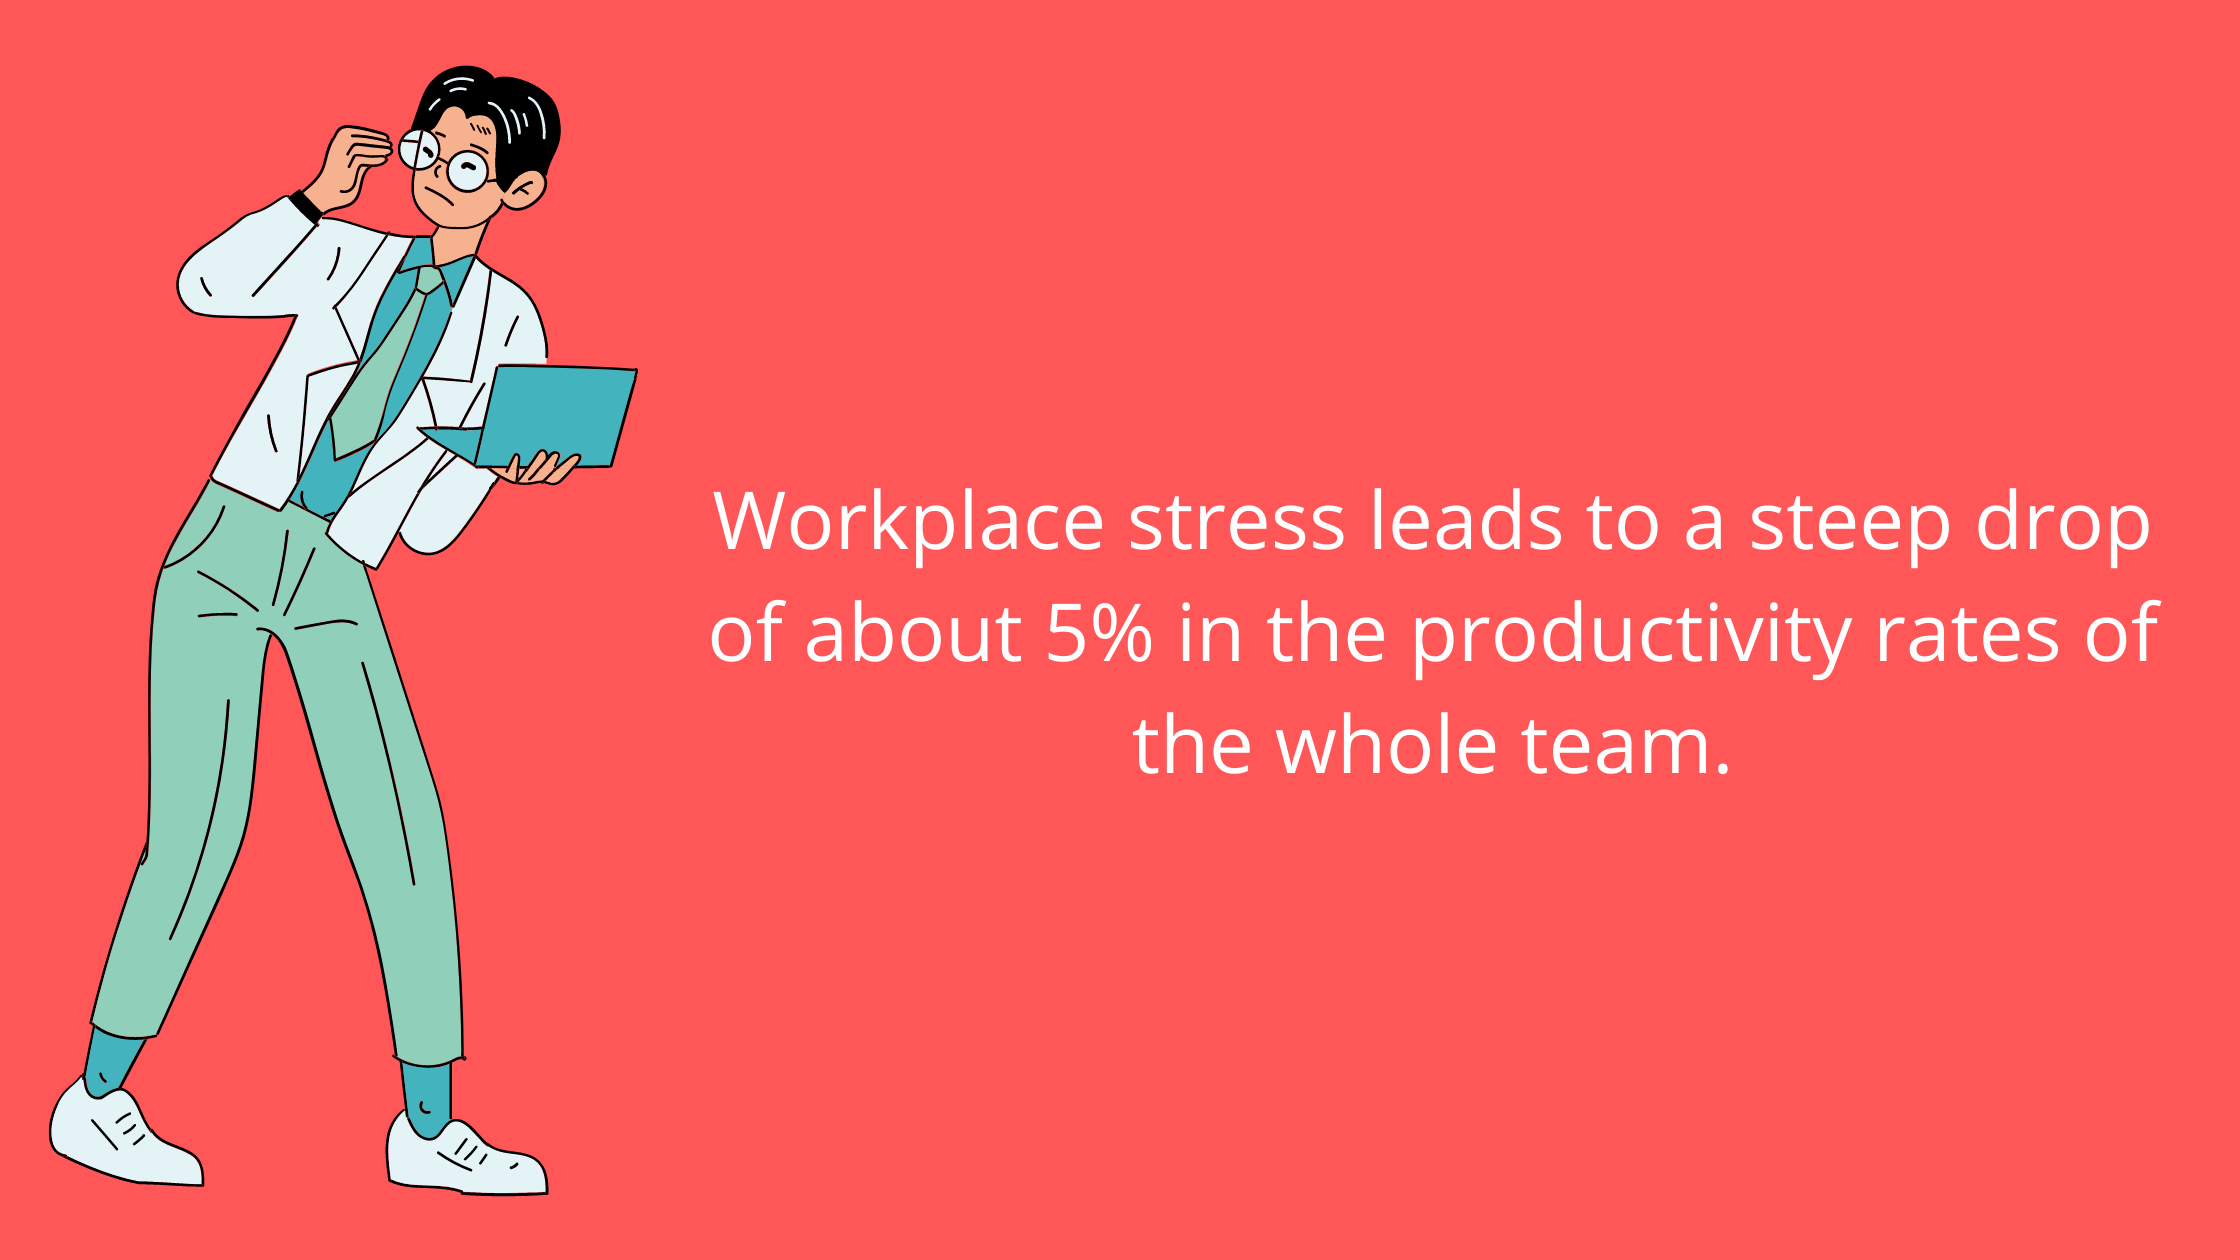 Workplace productivity stats & facts related to stress